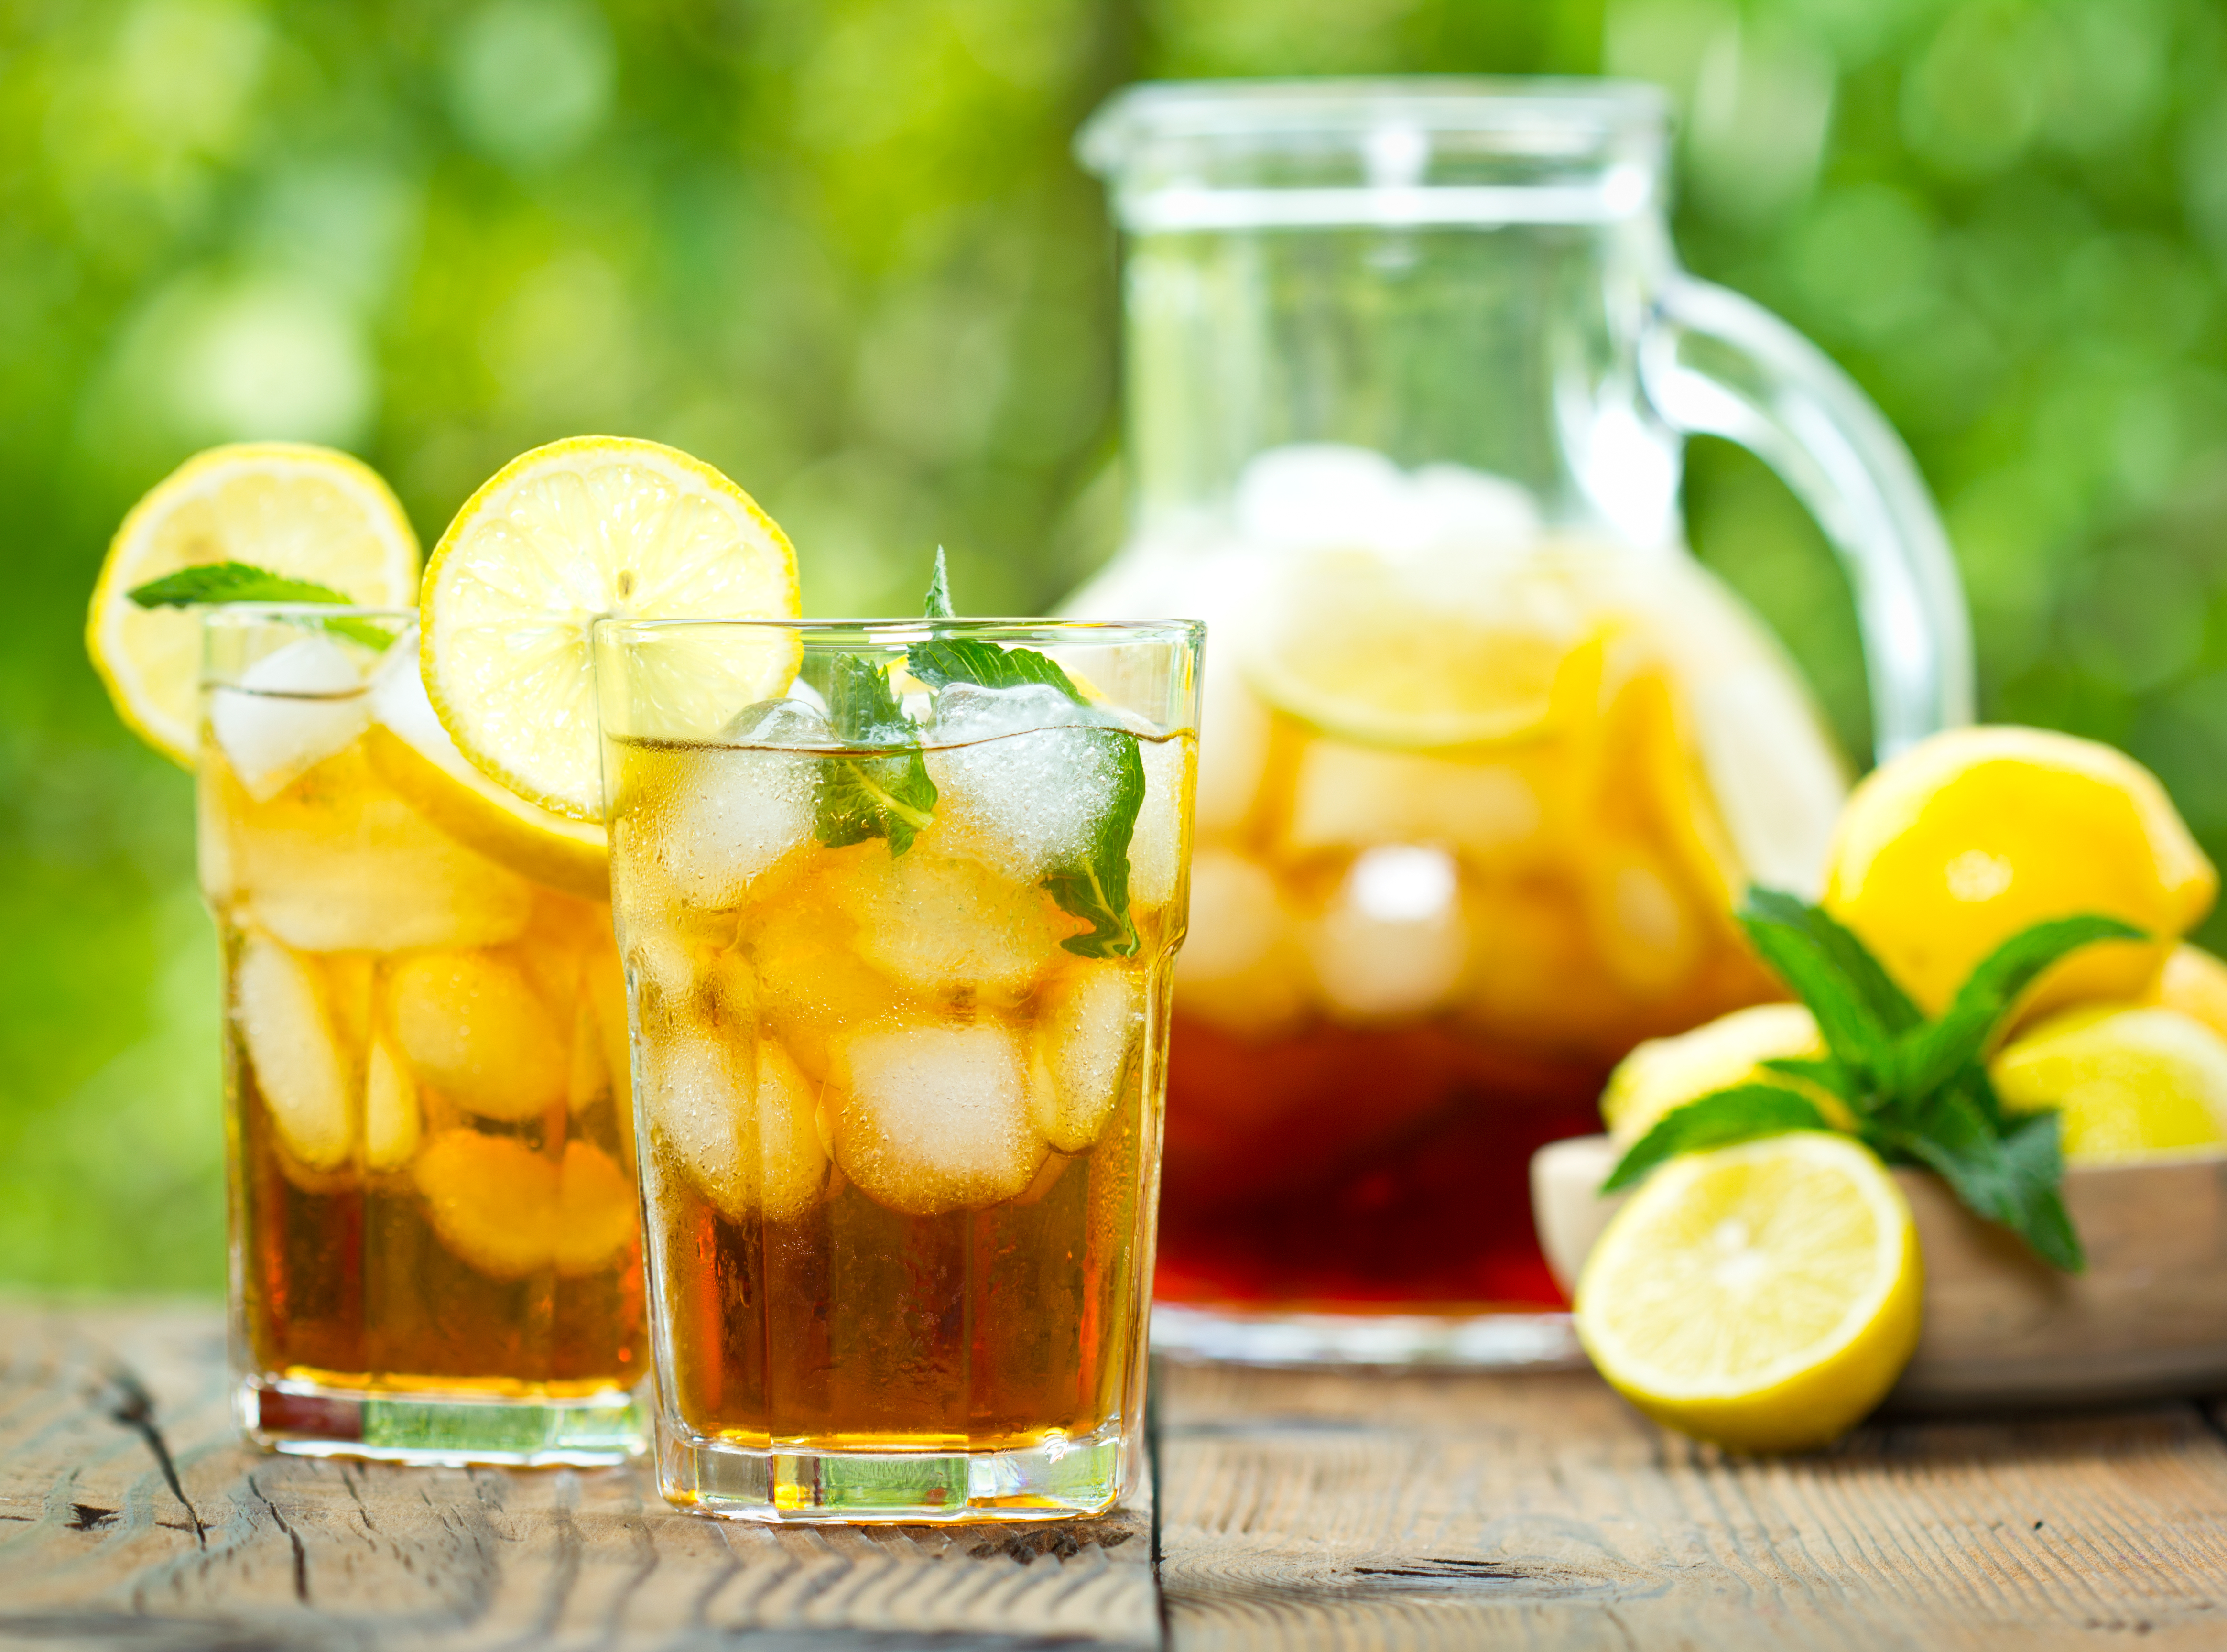 Dining in Oman: When it’s hot, chill with iced tea